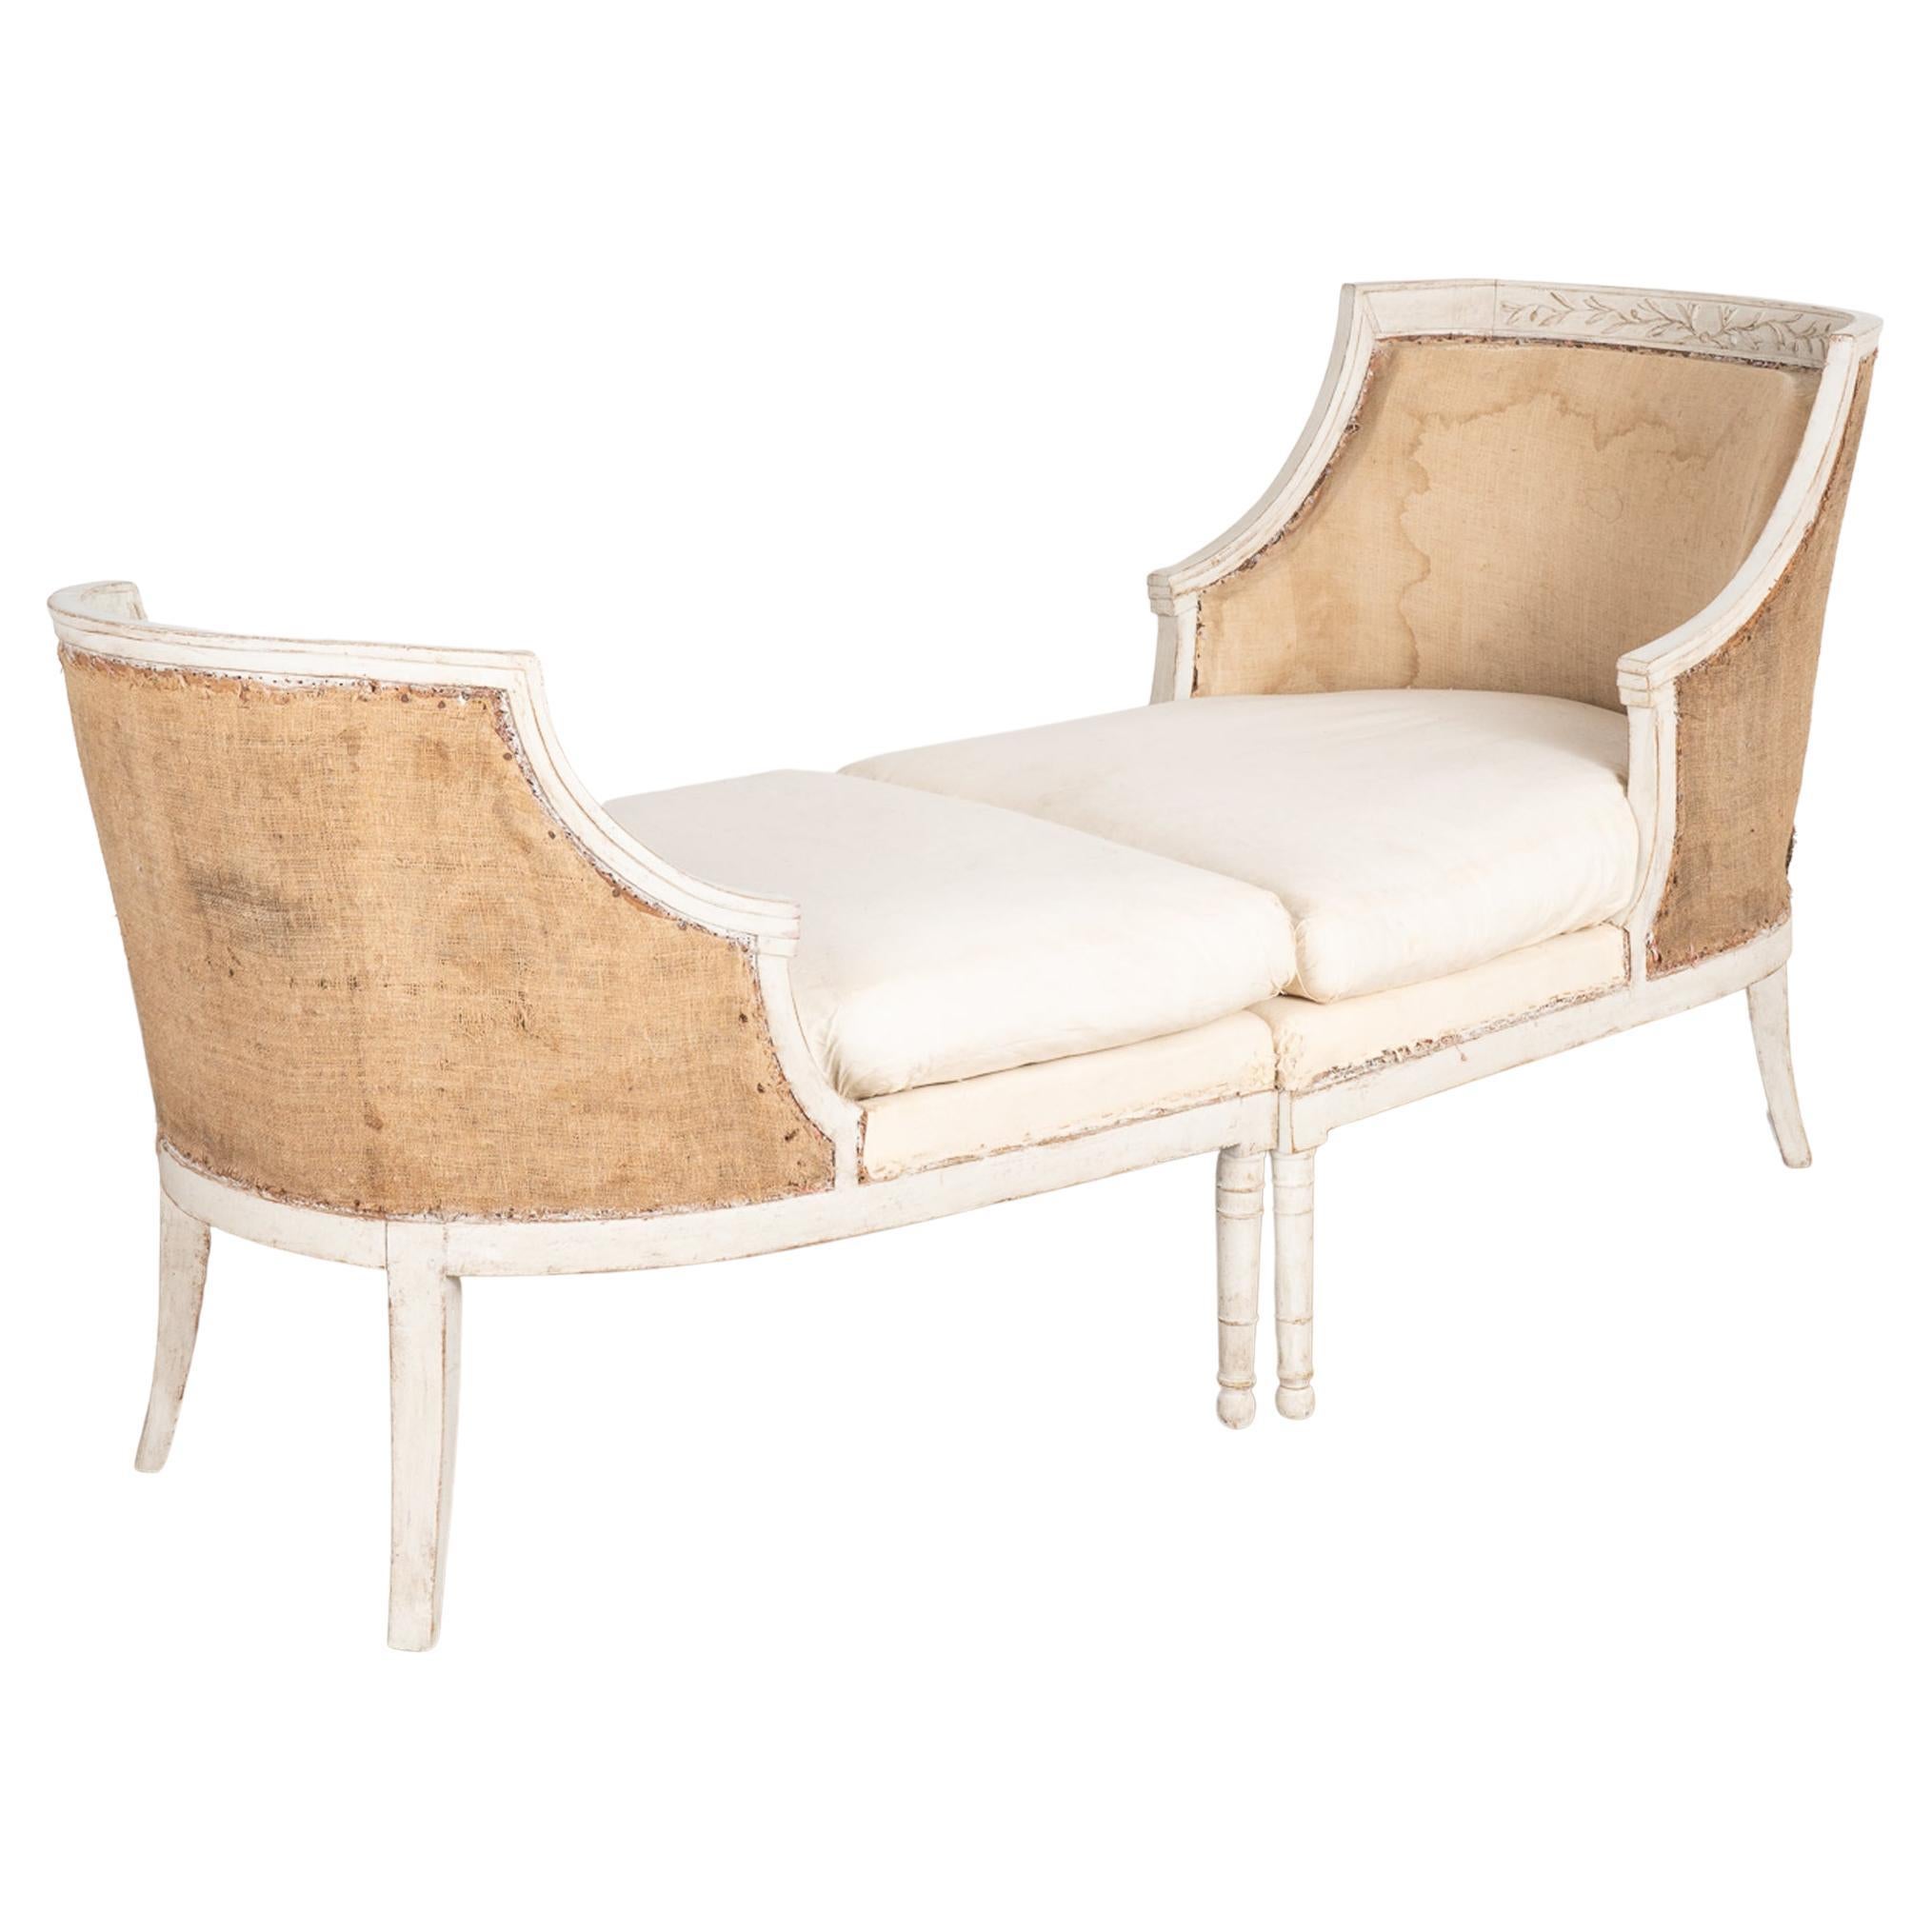 Pair, Swedish Gustavian Arm Chairs, Together Form Settee or Sofa, circa 1840